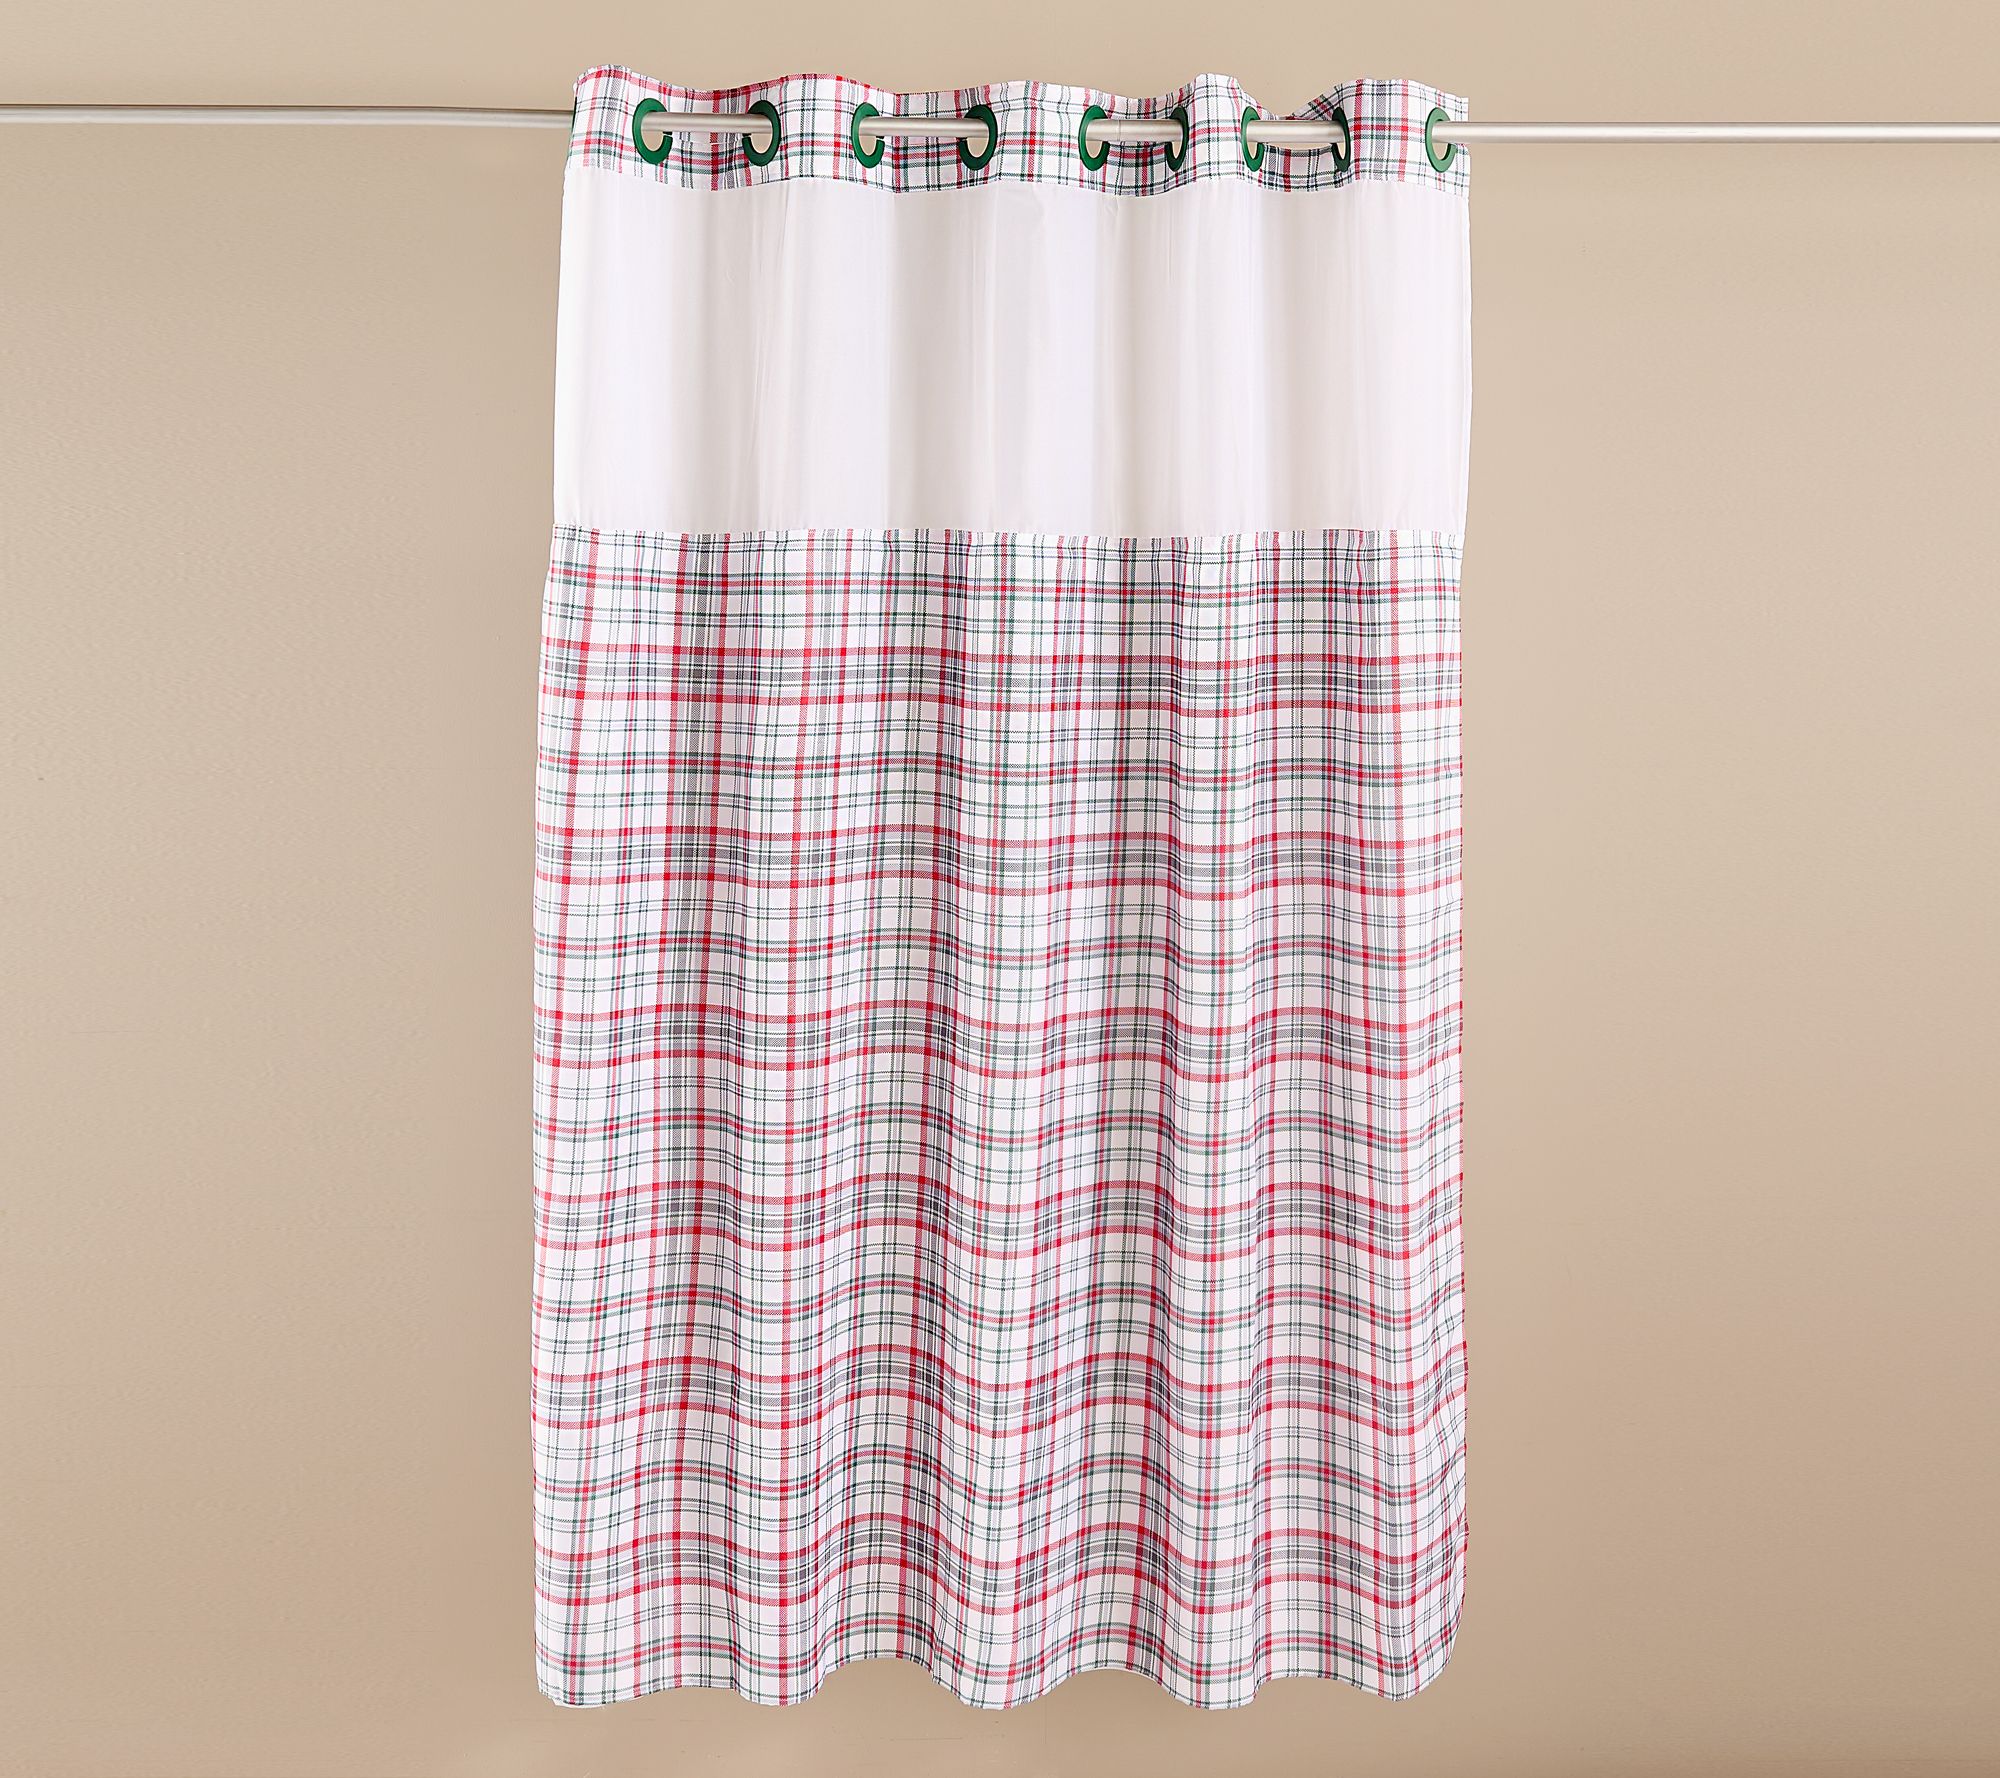 Hookless Print or Solid Shower Curtain with Window & Liner ,Holiday Plaid